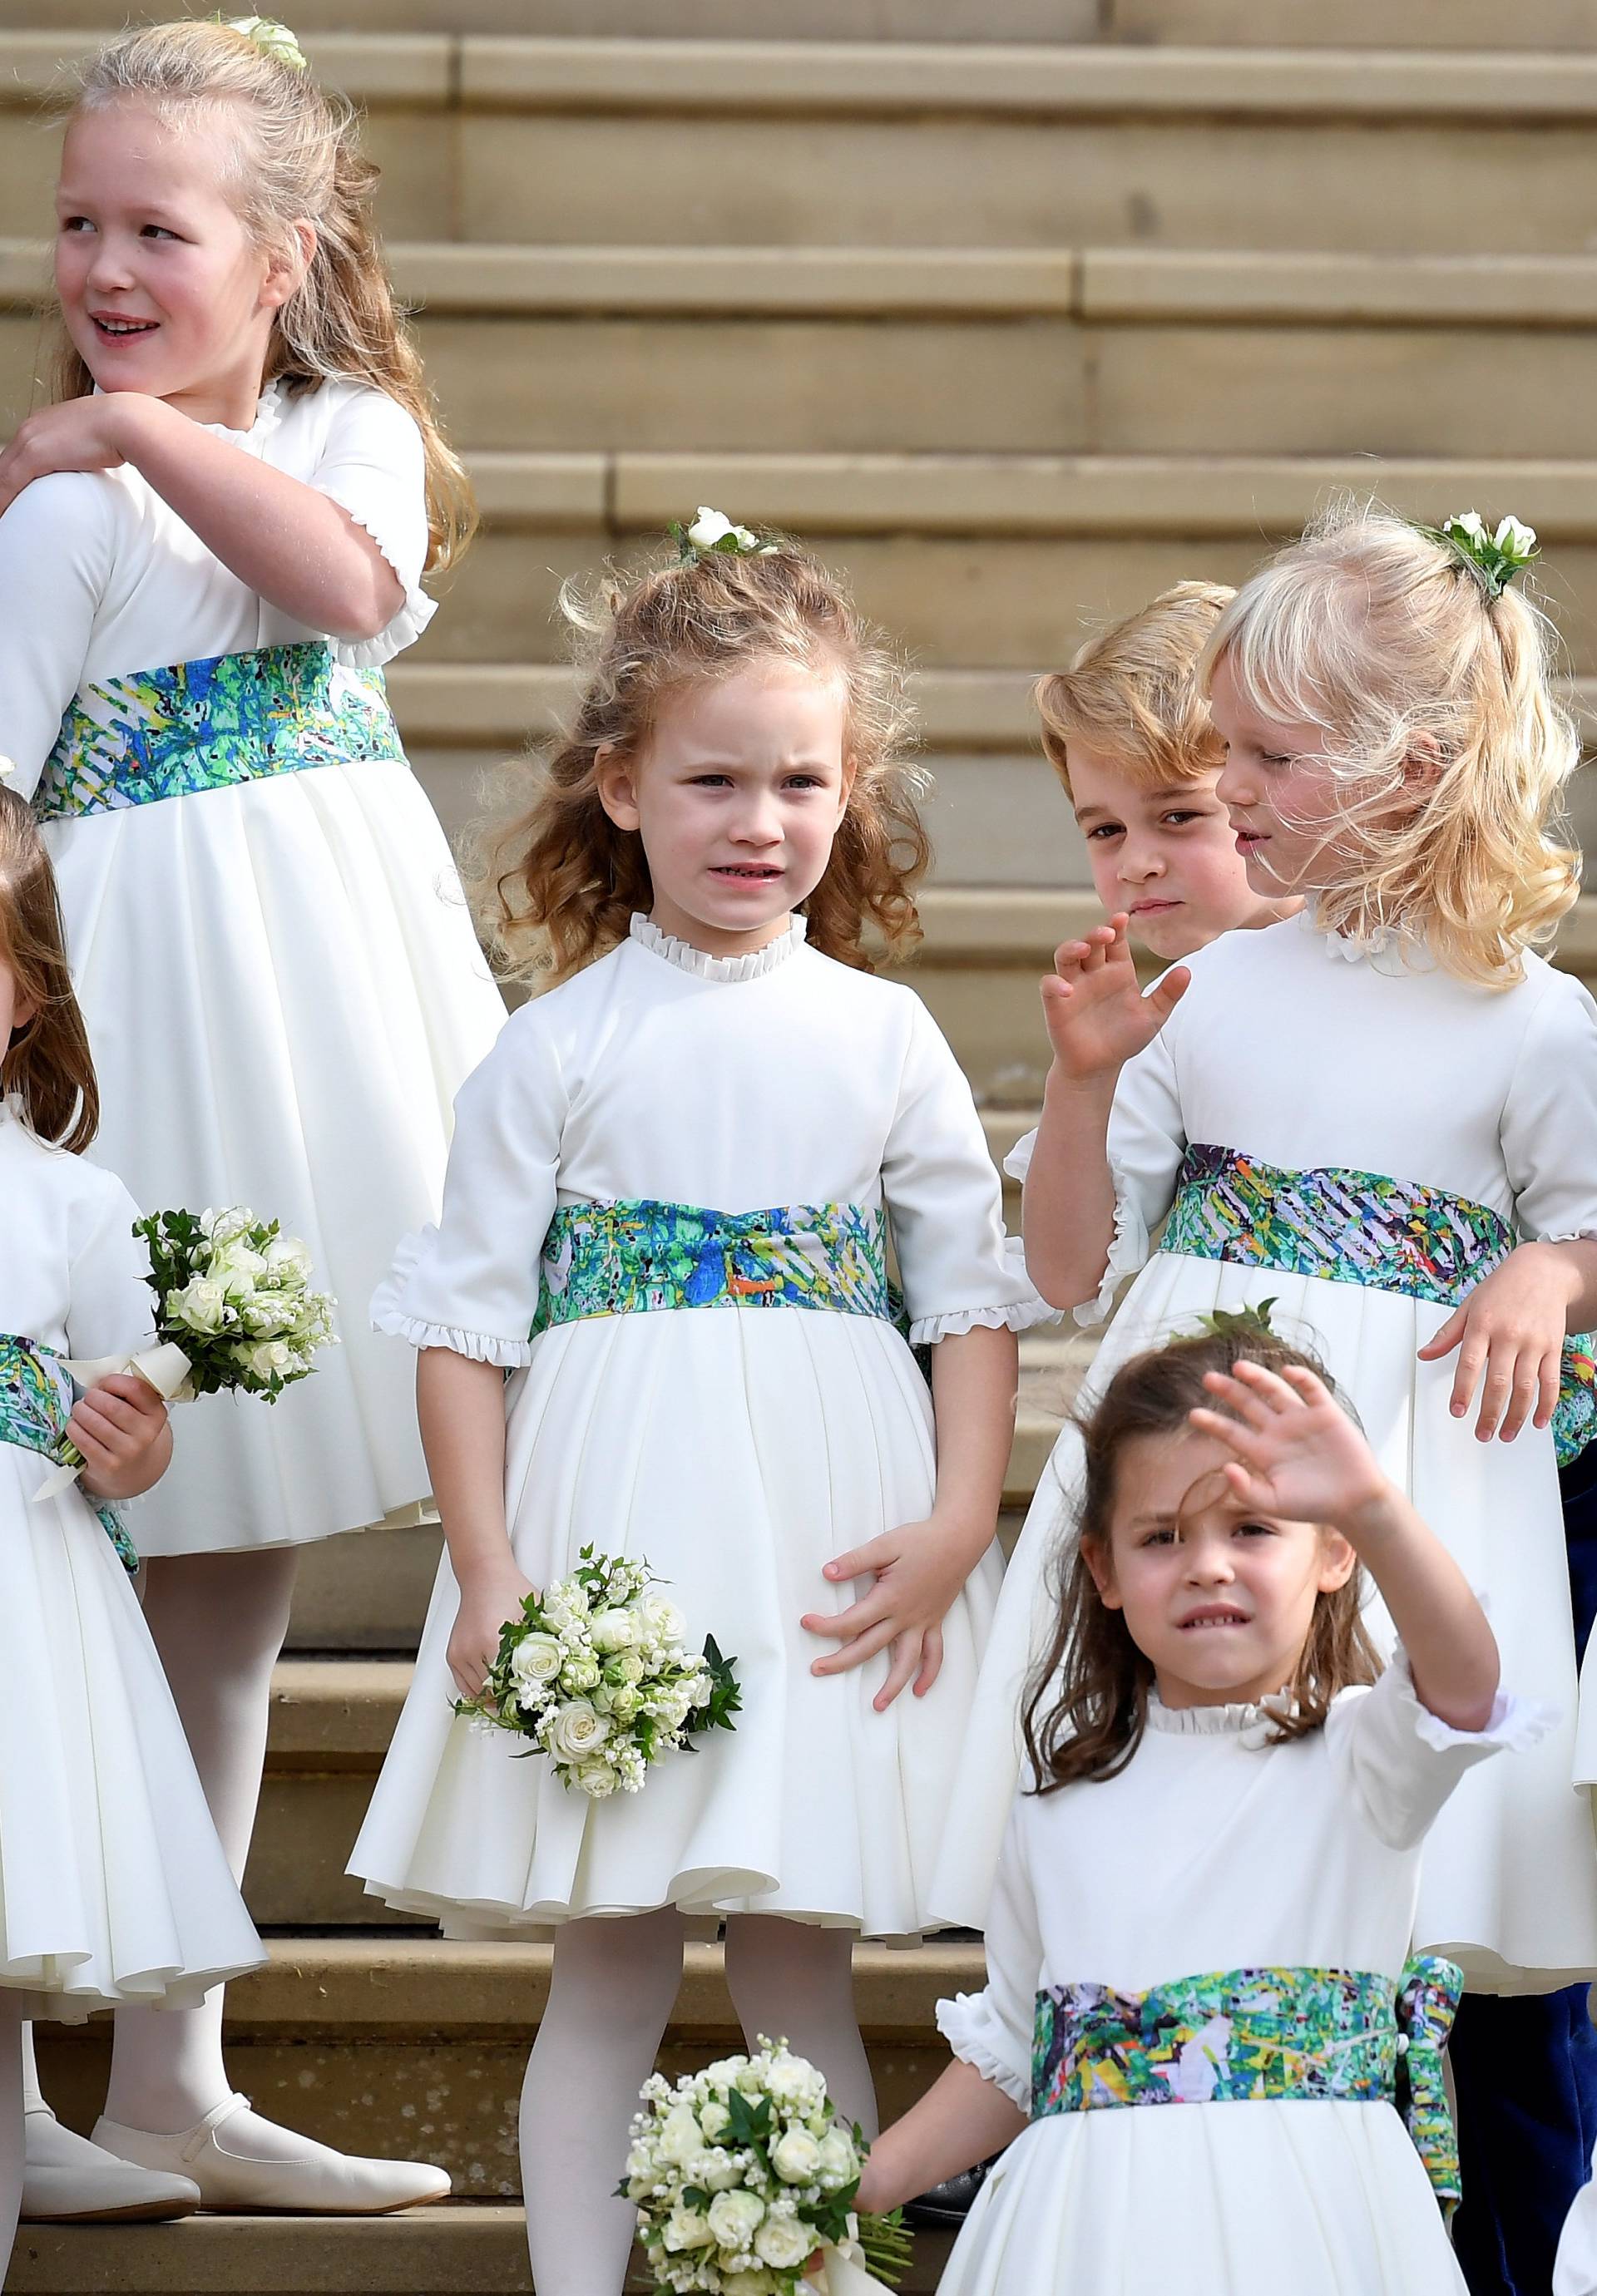 The bridesmaids and page boys, including Prince George and Princess Charlotte, wave as they leave after the royal wedding of Britain's Princess Eugenie of York and her husband Jack Brooksbank at St George's Chapel in Windsor Castle